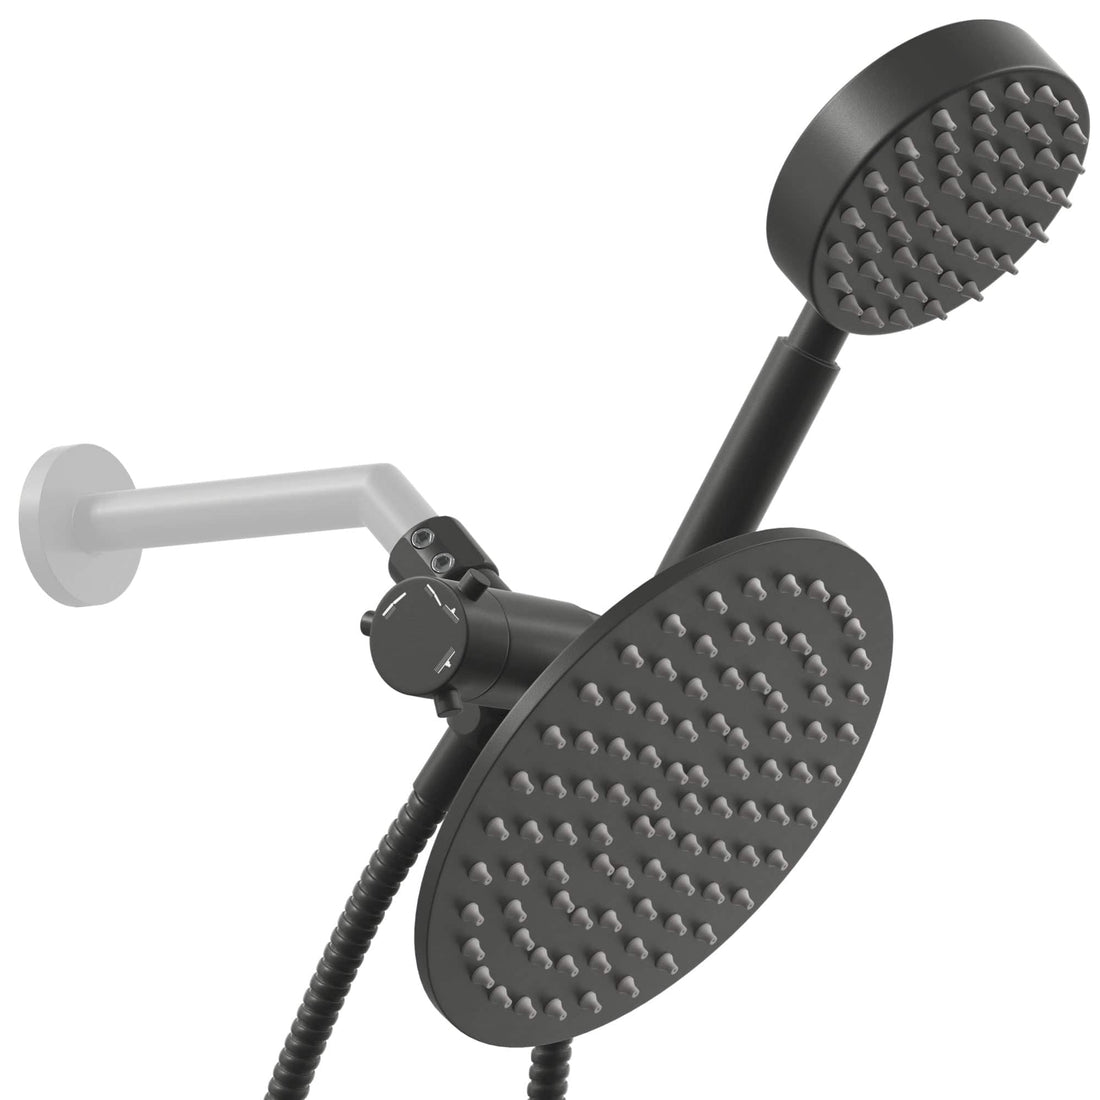 (Main Image) All Metal Dual Shower Head Combo Rainfall and Handheld Shower Head Matte Black - The Shower Head Store